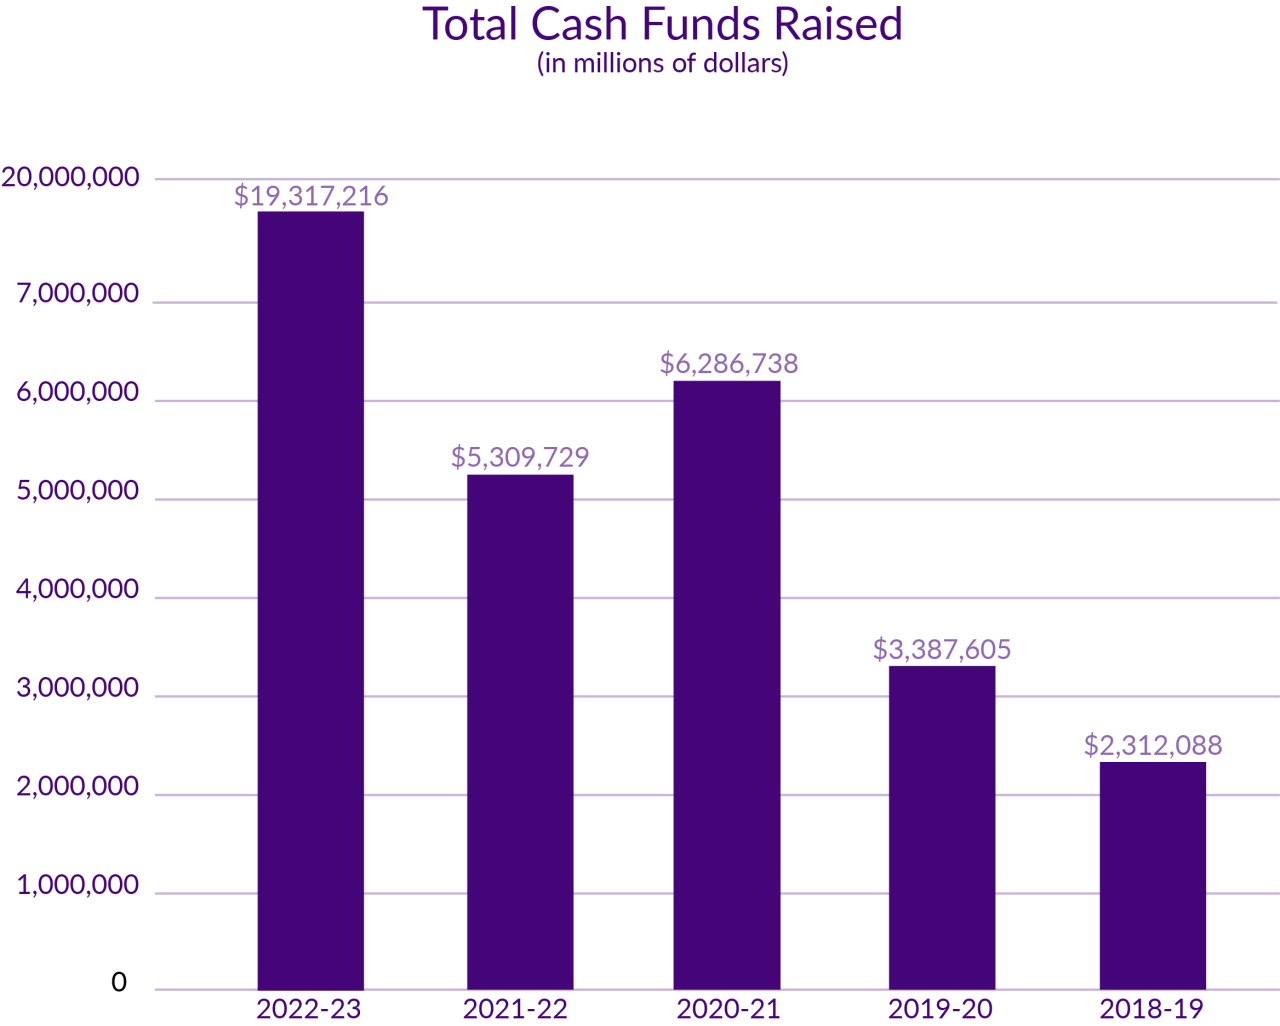 Total Cash Funds Raised